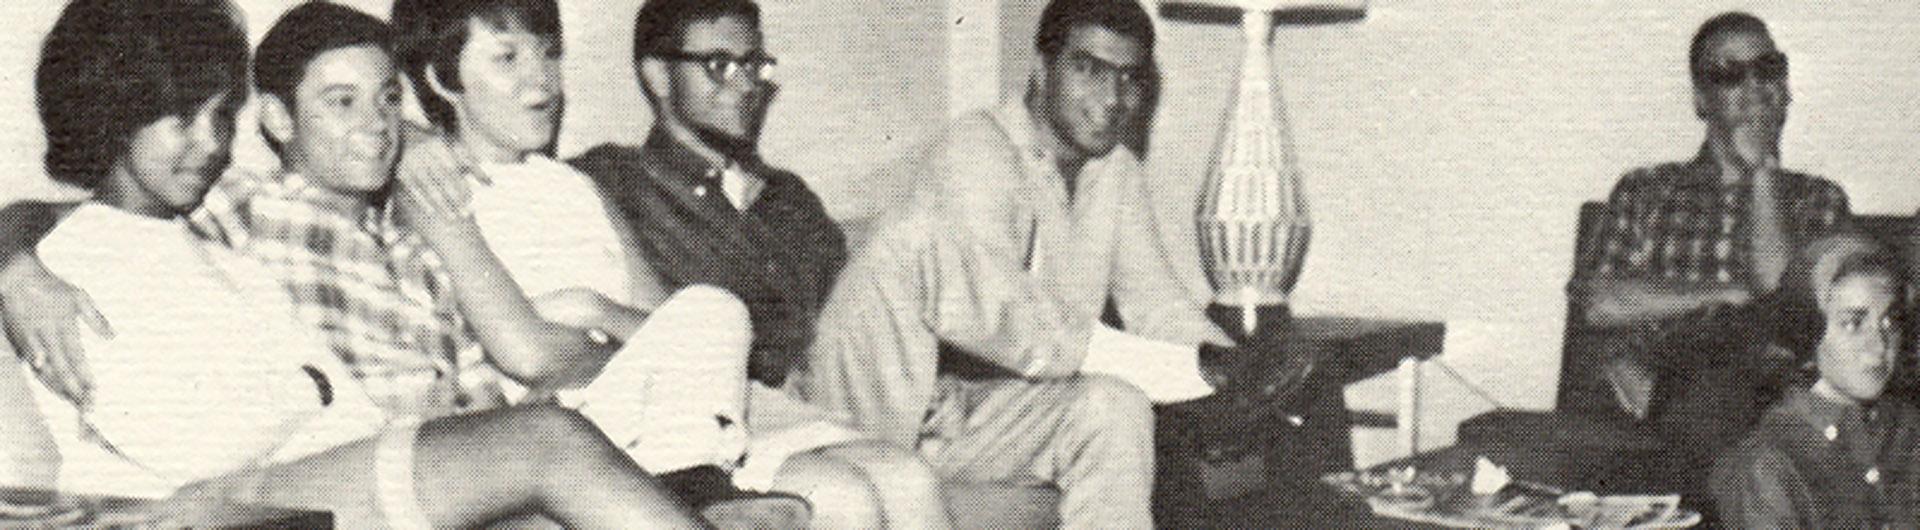 1960's campus image, students sharing together